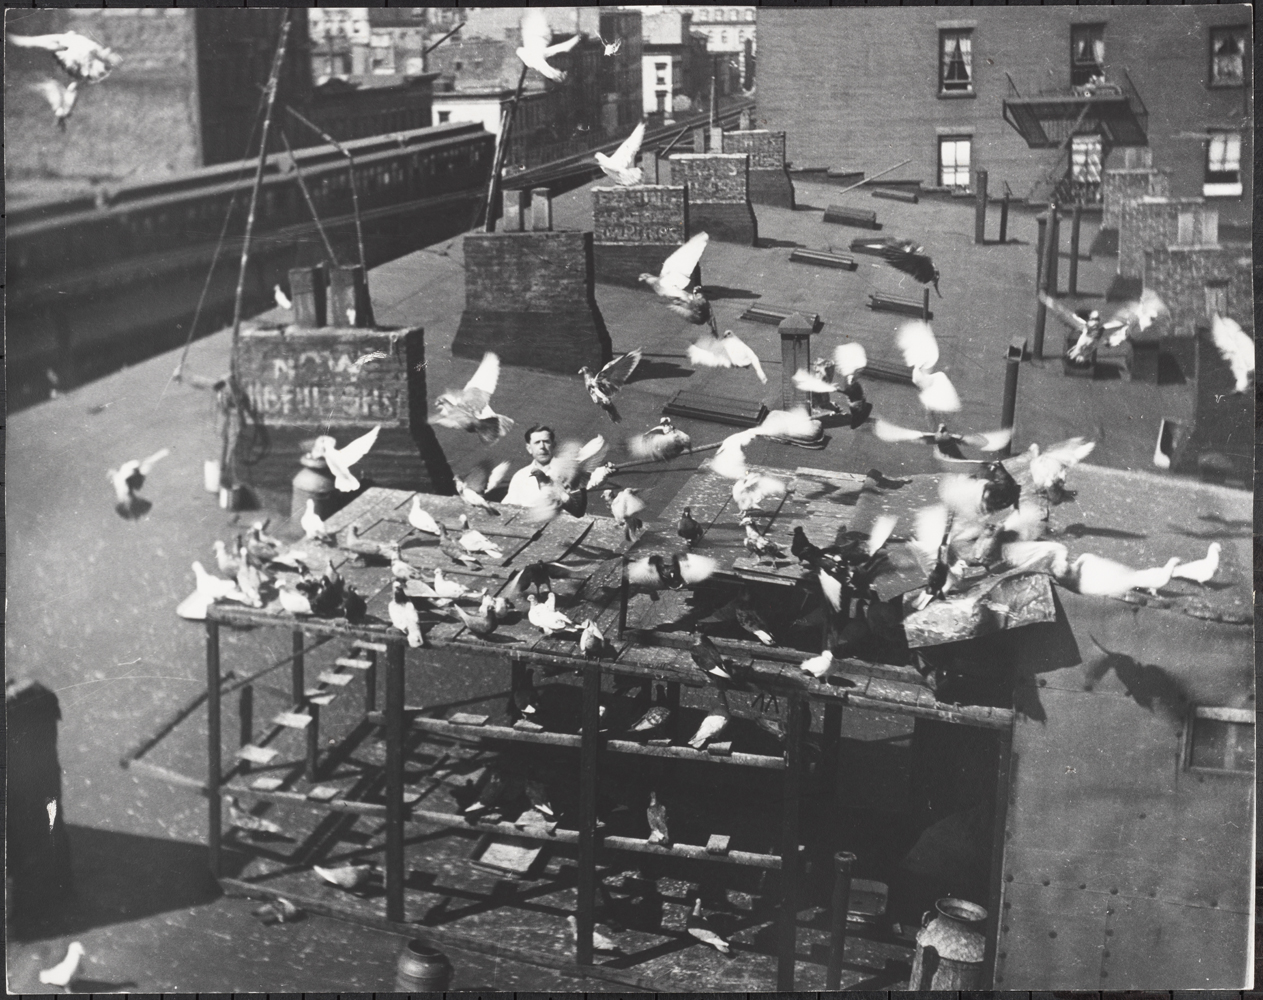 Roy Perry. Man on Roof Tending Pigeon Brood, Third Avenue, ca 1940. Museum of the City of New York. 80.102.178